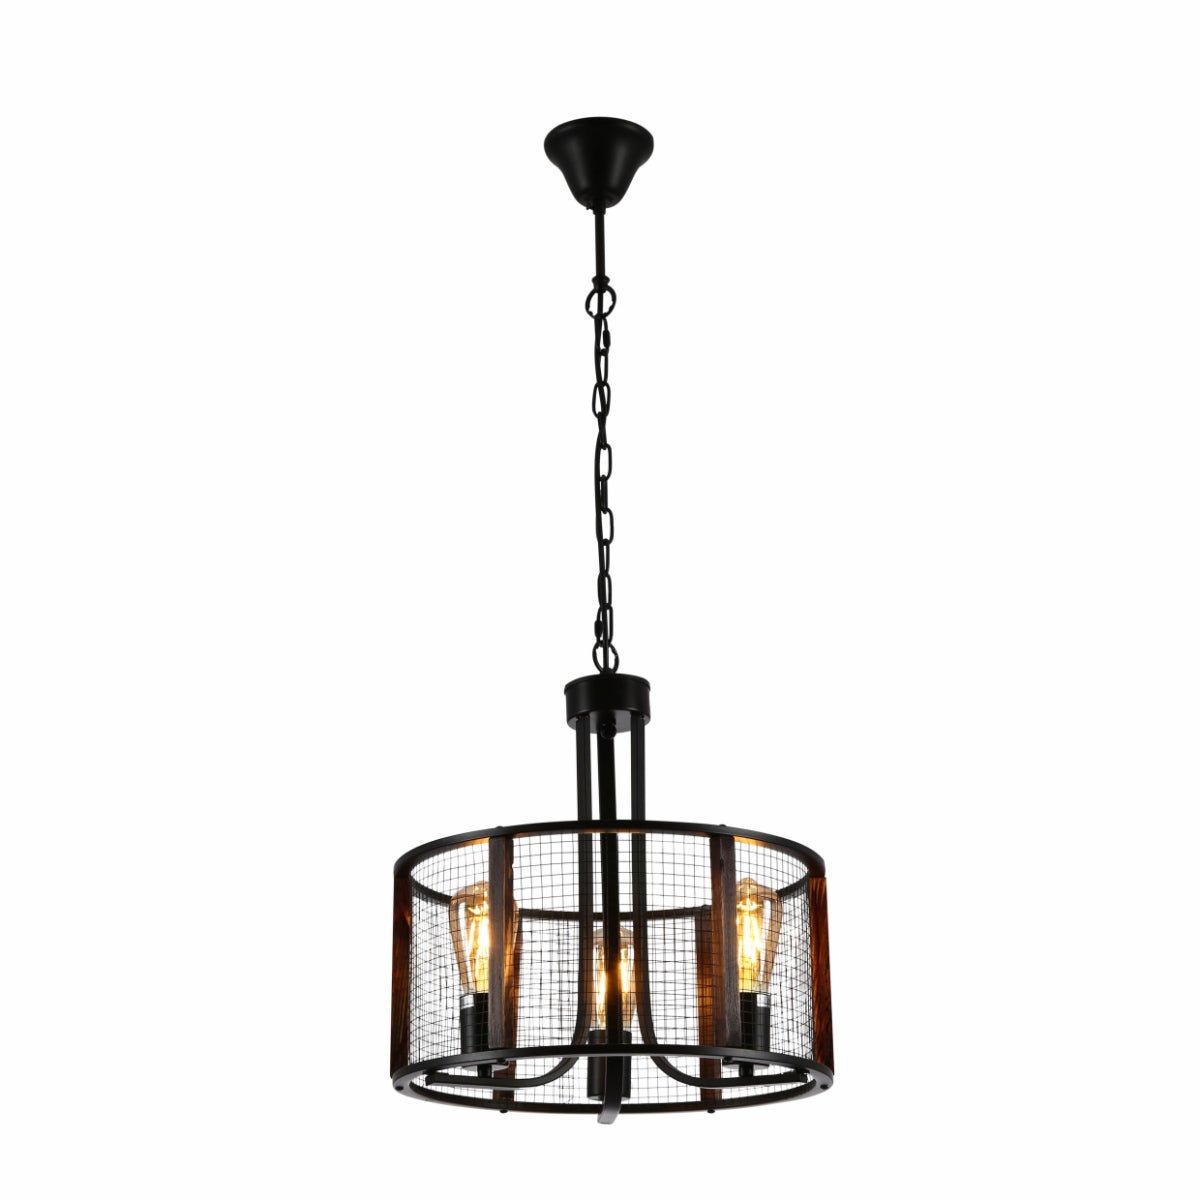 Main image of Black Metal Natural Wood Cylinder Cage Pendant Ceiling Light with 3xE27  | TEKLED 156-19530